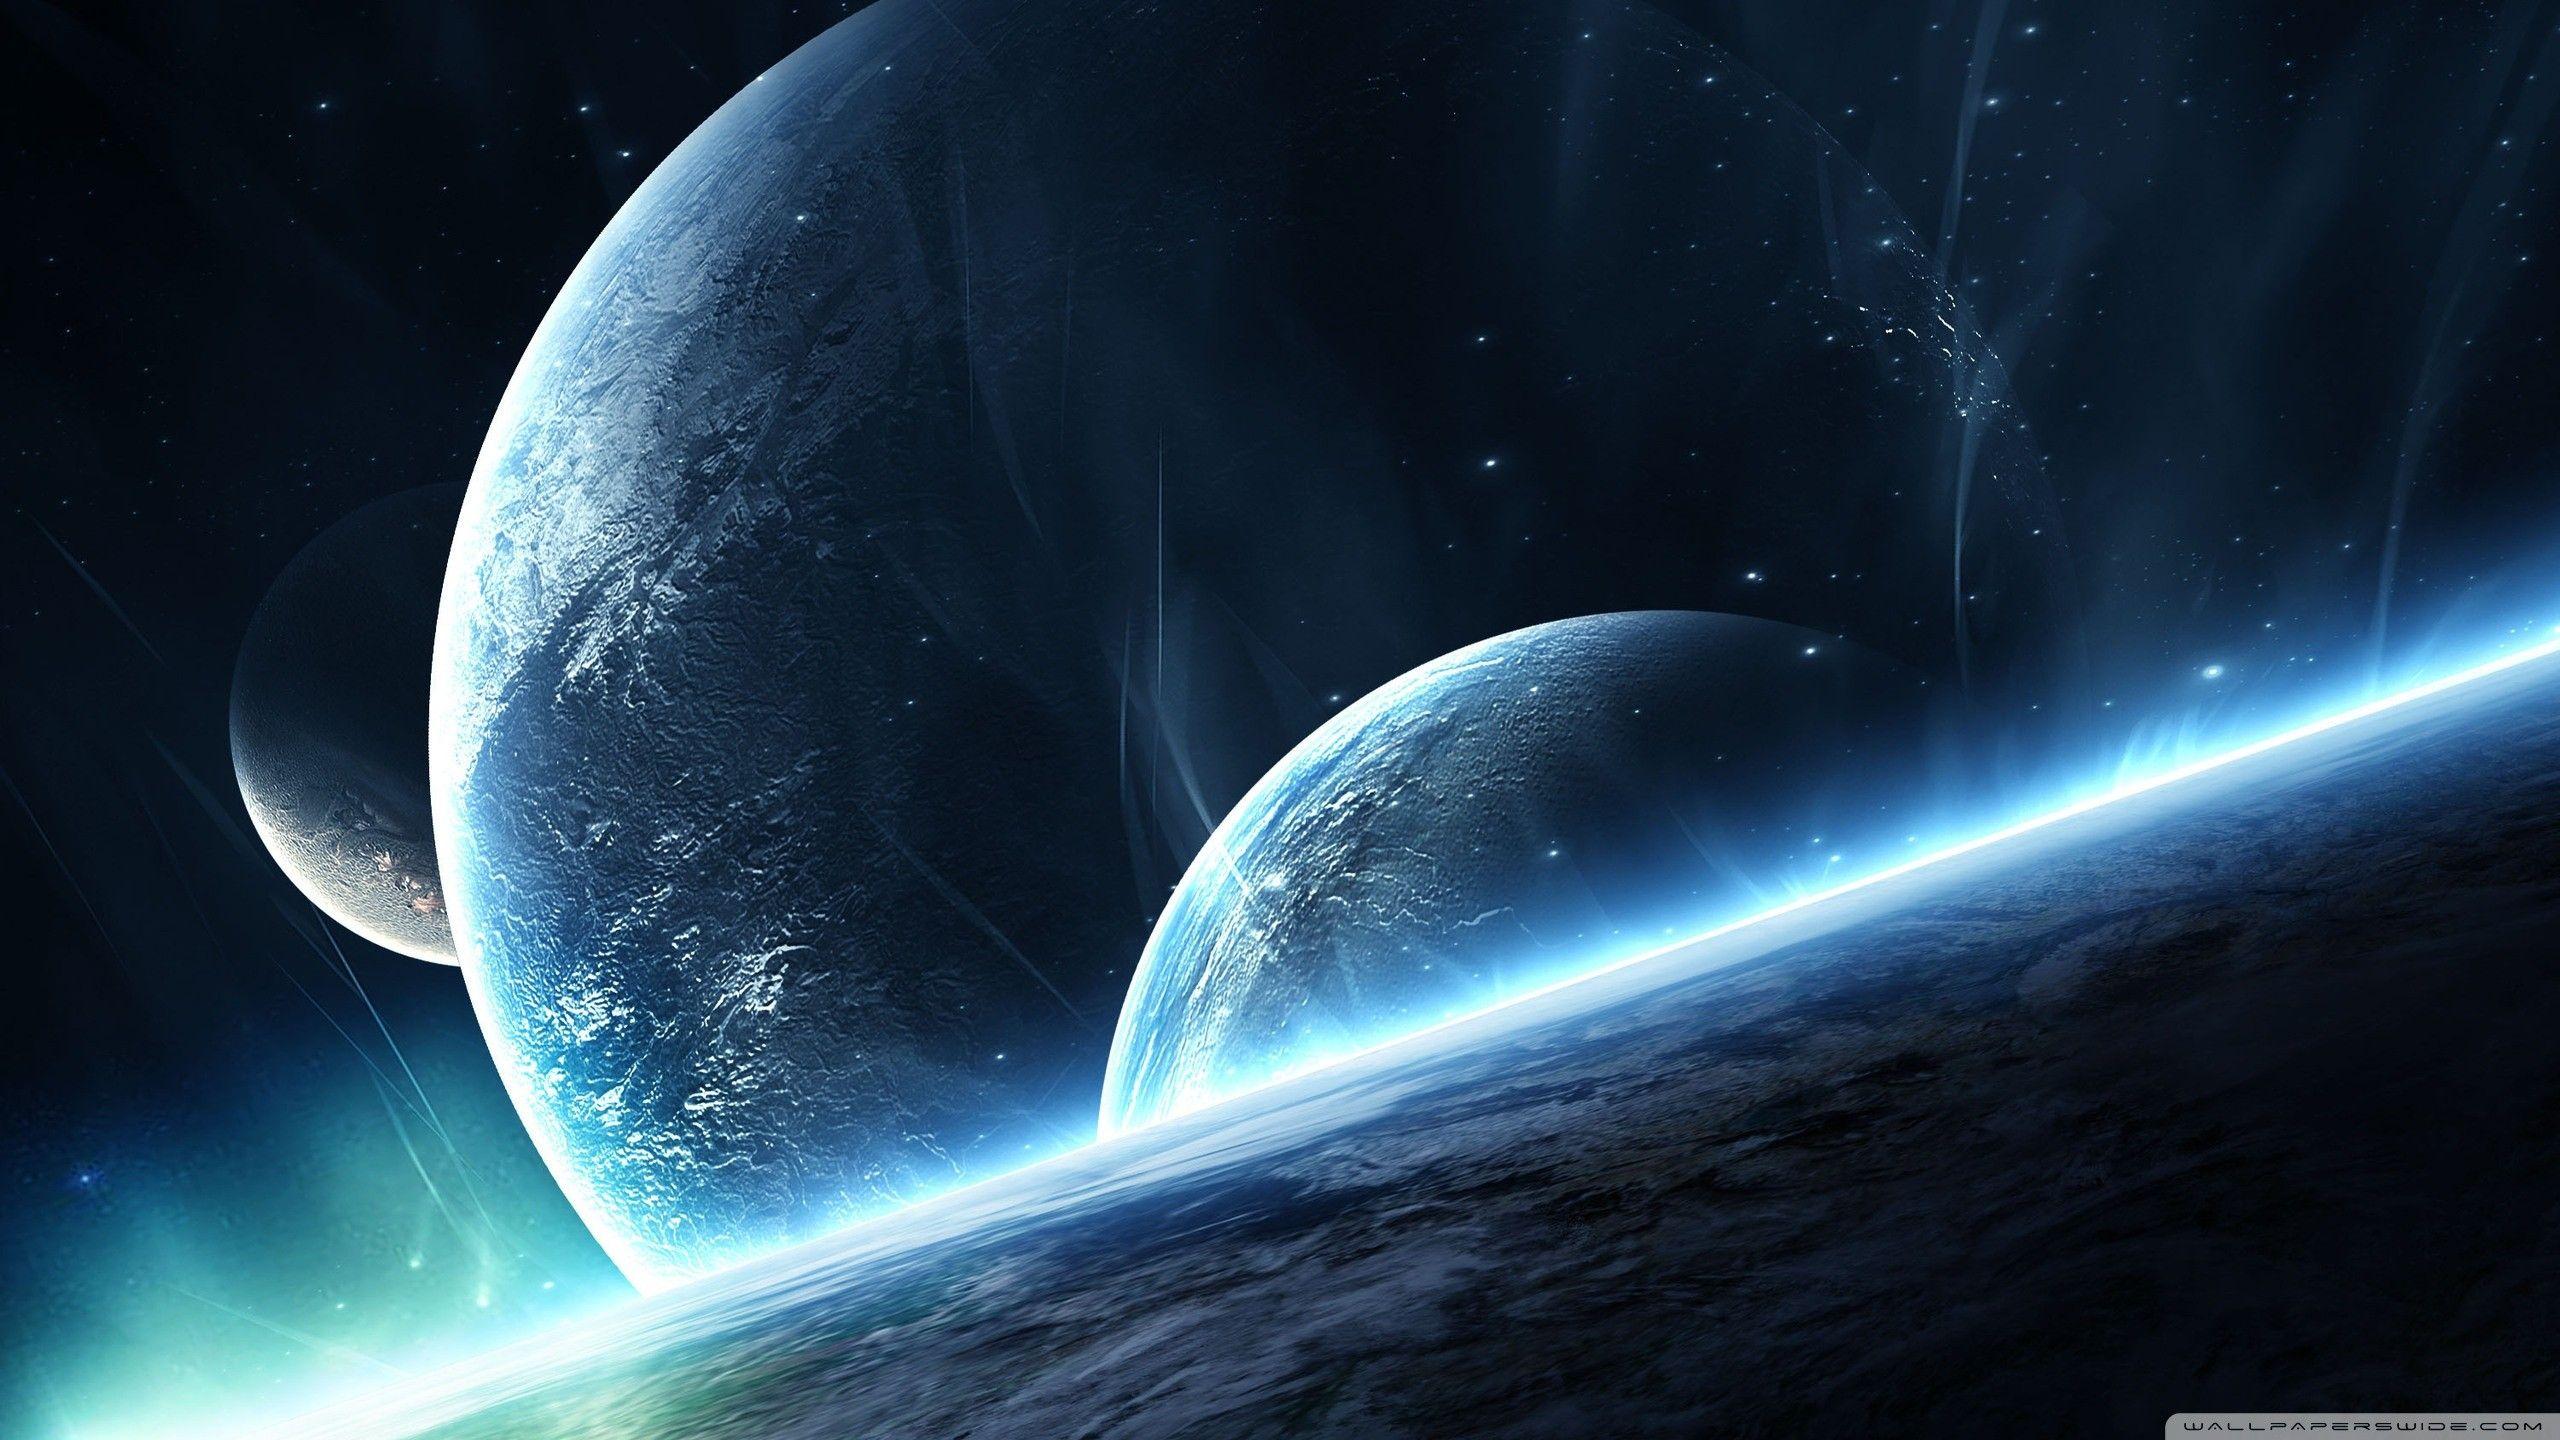 Planets Hd Wallpapers Top Free Planets Hd Backgrounds Wallpaperaccess 1301